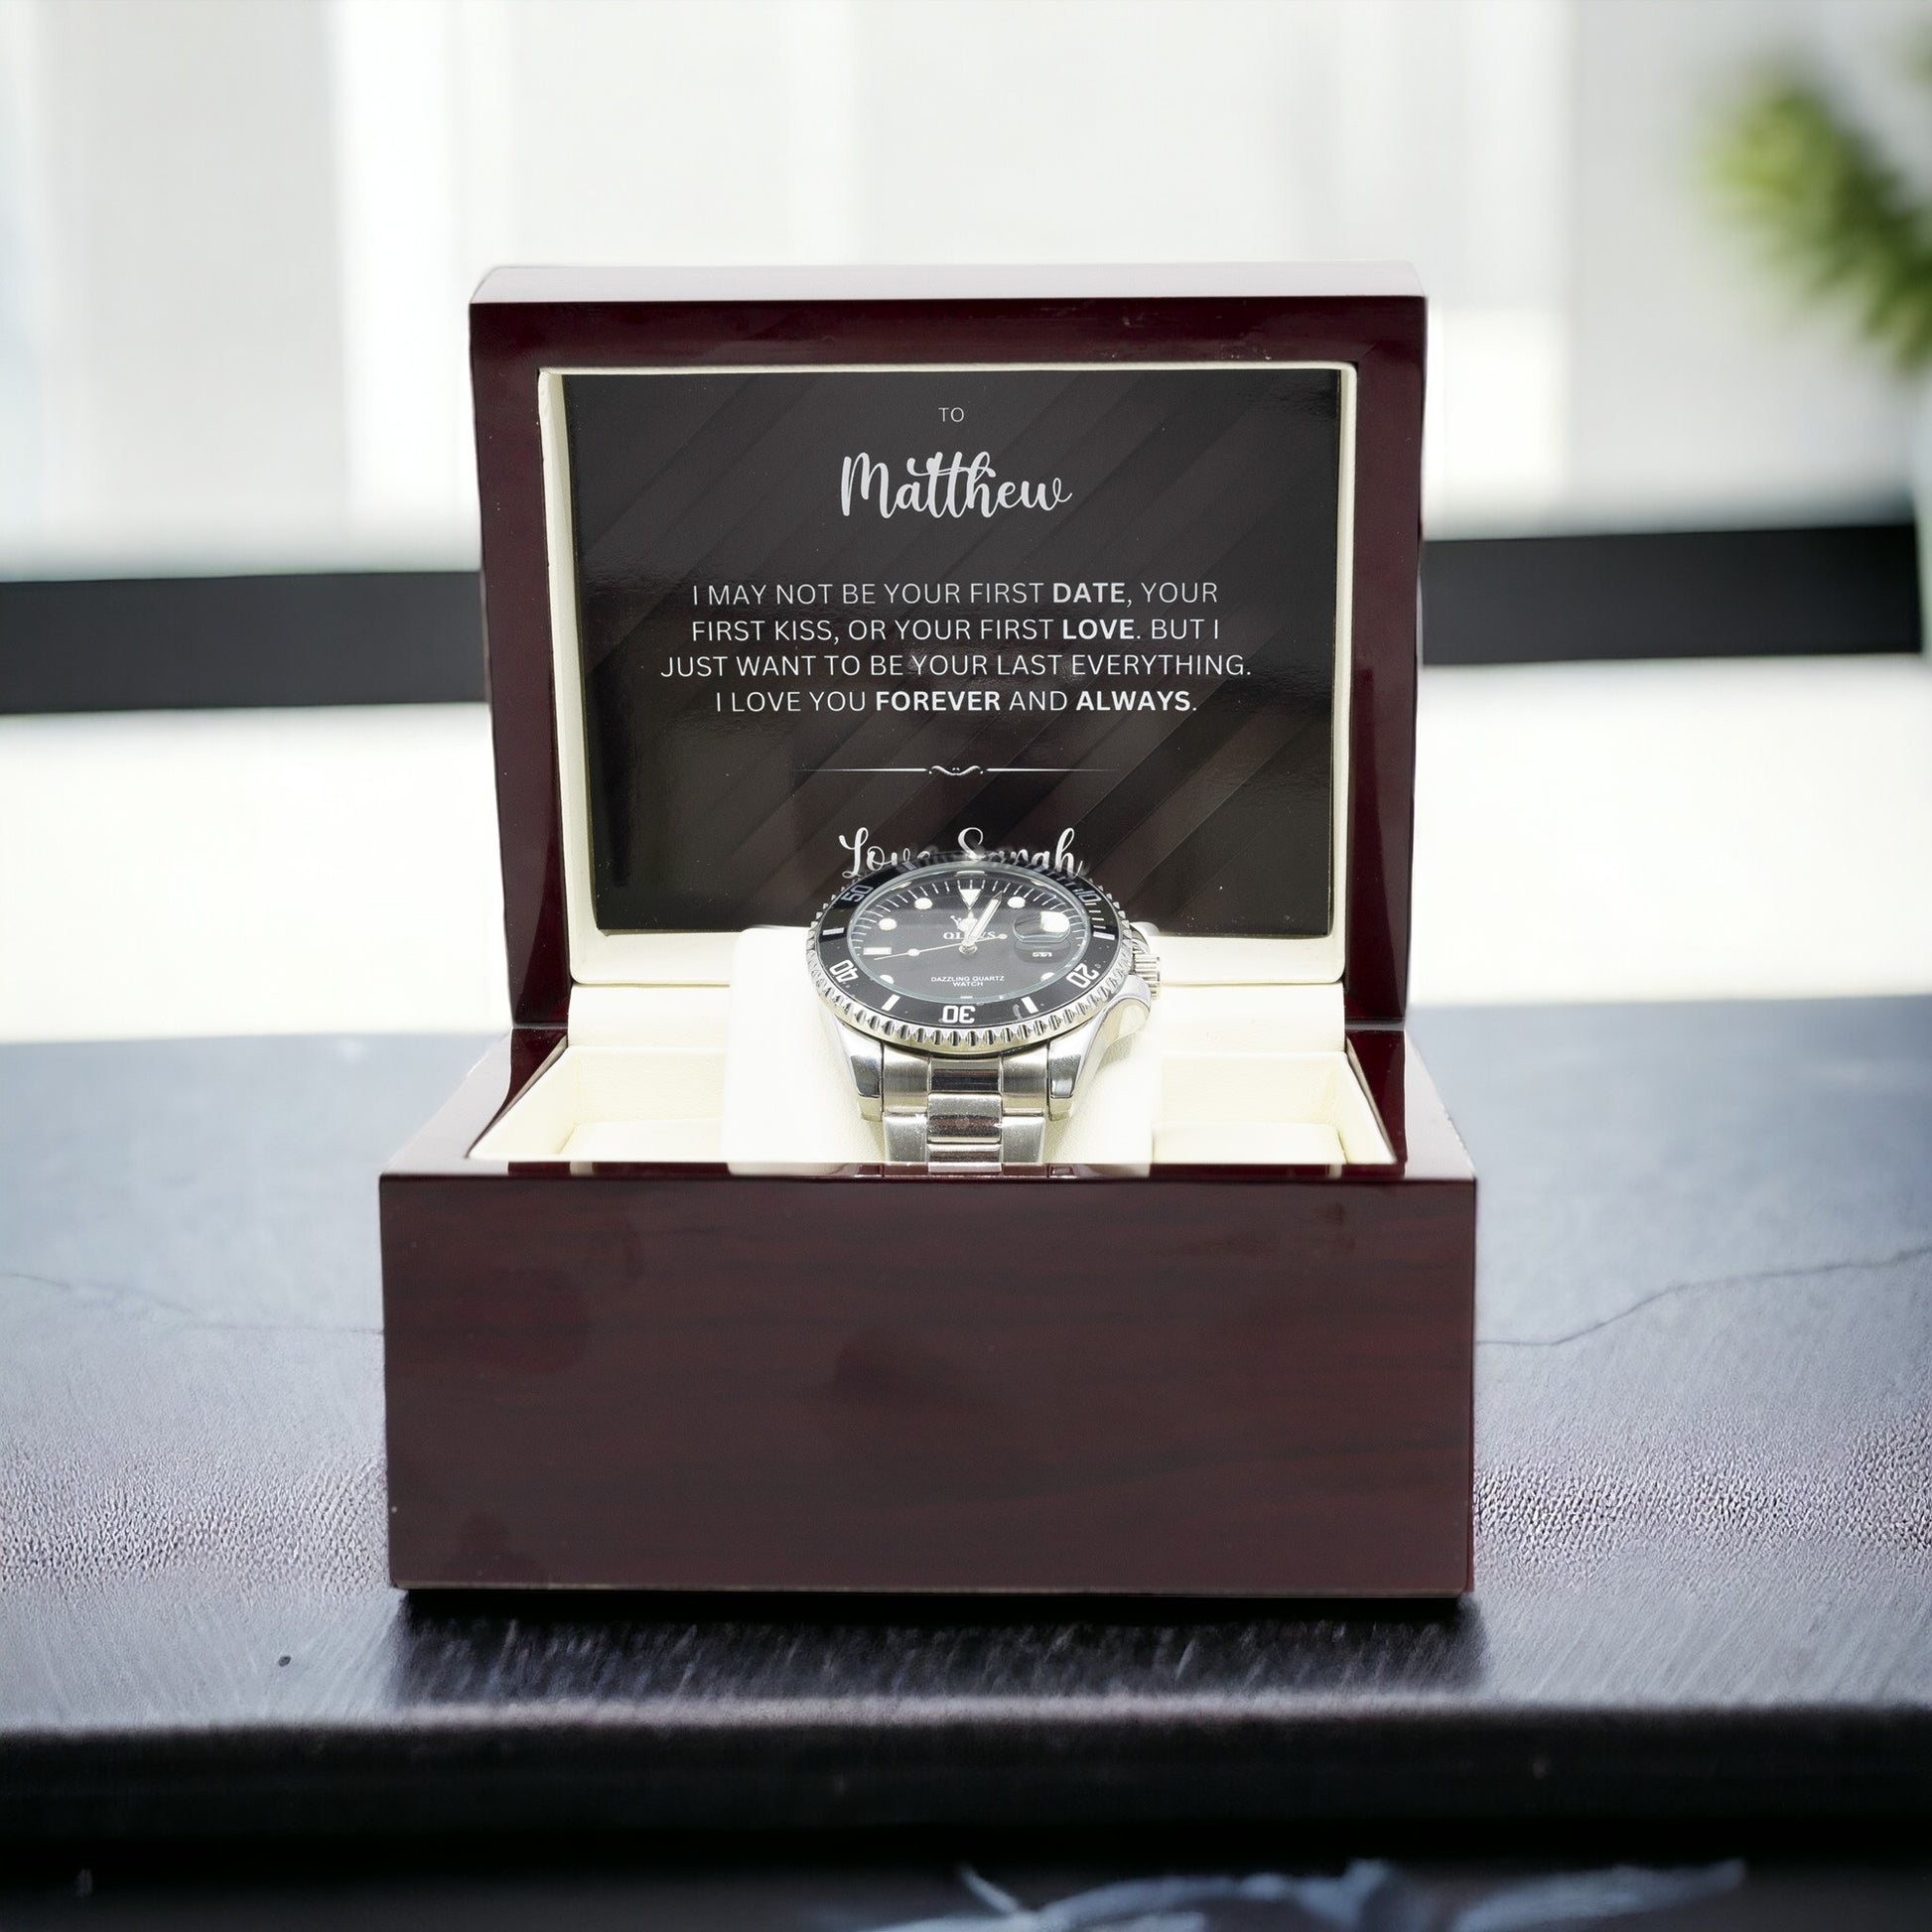 Luxury Watch Gift Set With Personalised Message Card - Gift For Brother, Husband, Boyfriend. Anniversay Gift Watch - Gift From Parter